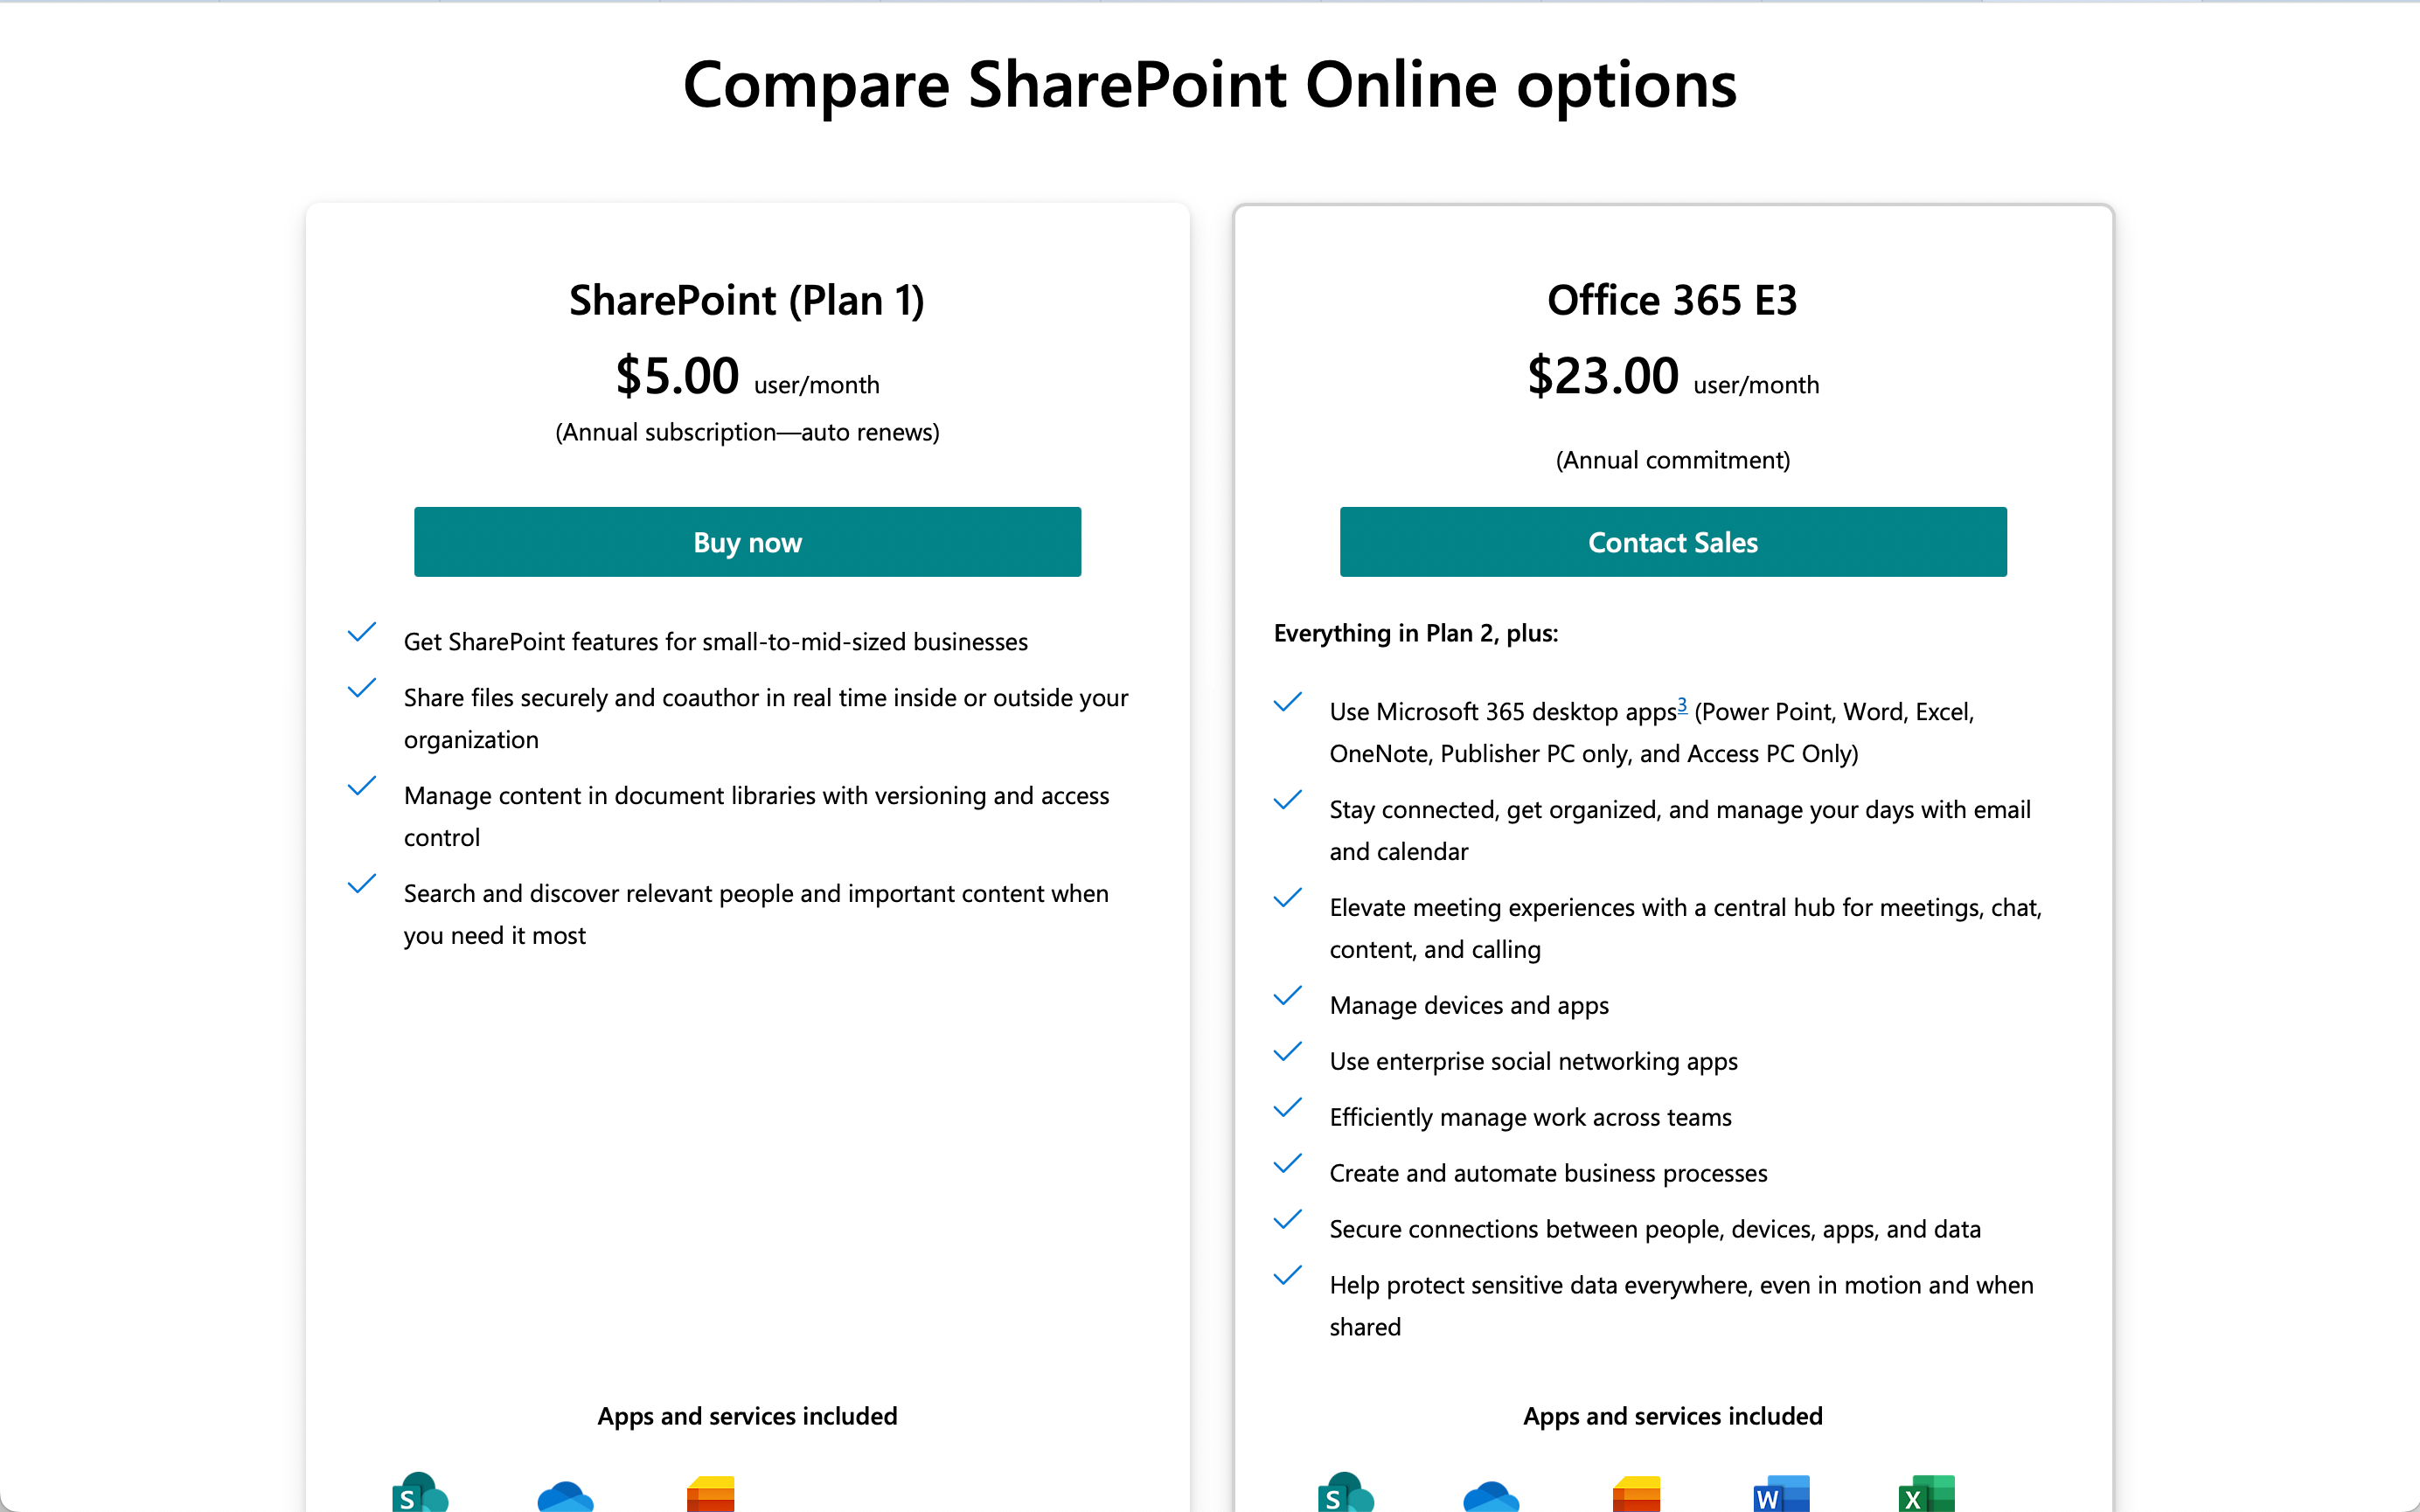 Available SharePoint subscription plans